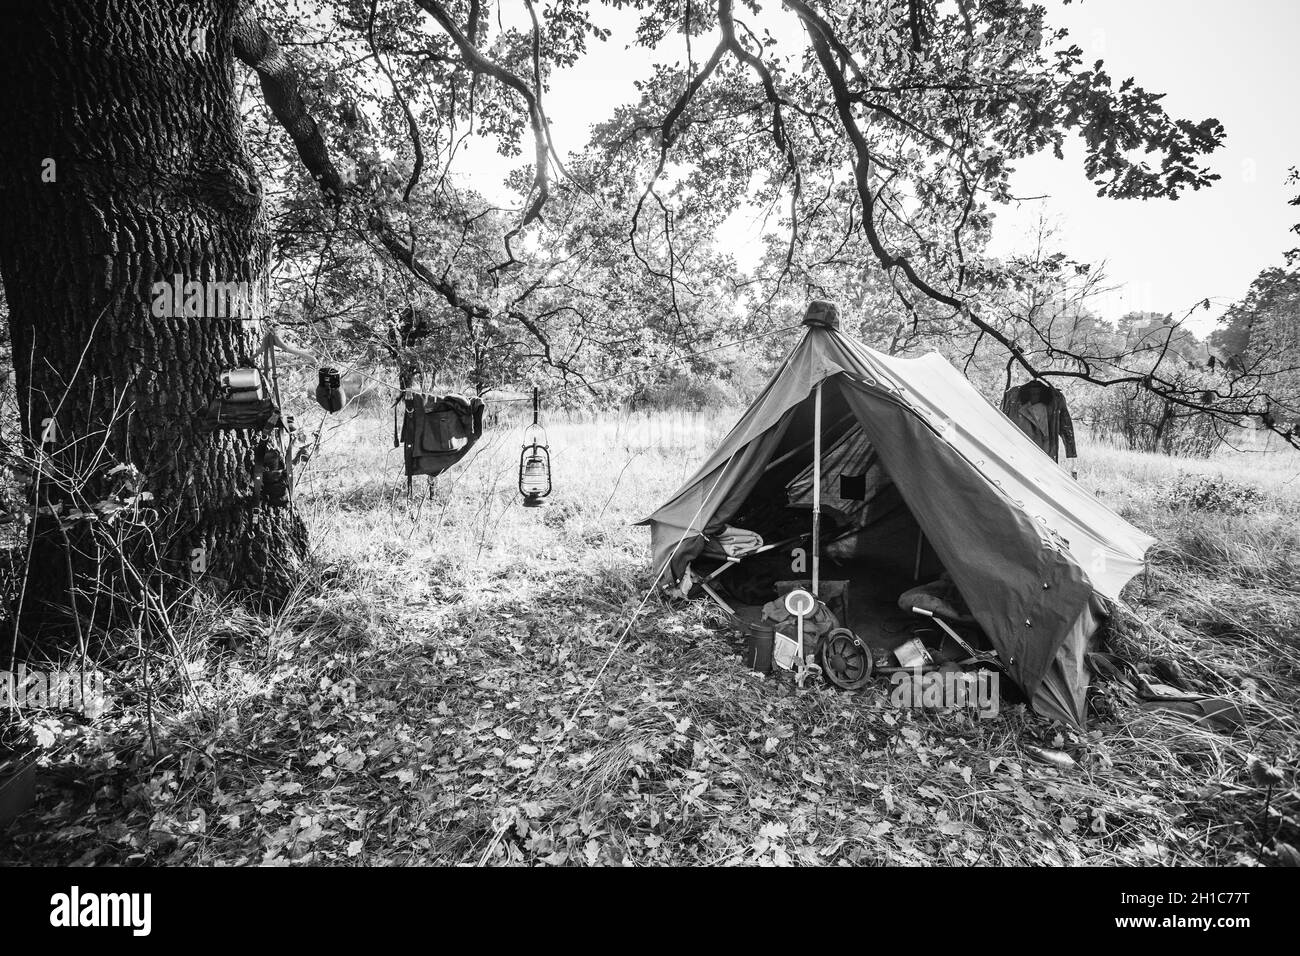 World War II German Wehrmacht Infantry Tent In Forest Camp. WWII WW2 German Ammunition. Photo In Black And White Colors Stock Photo